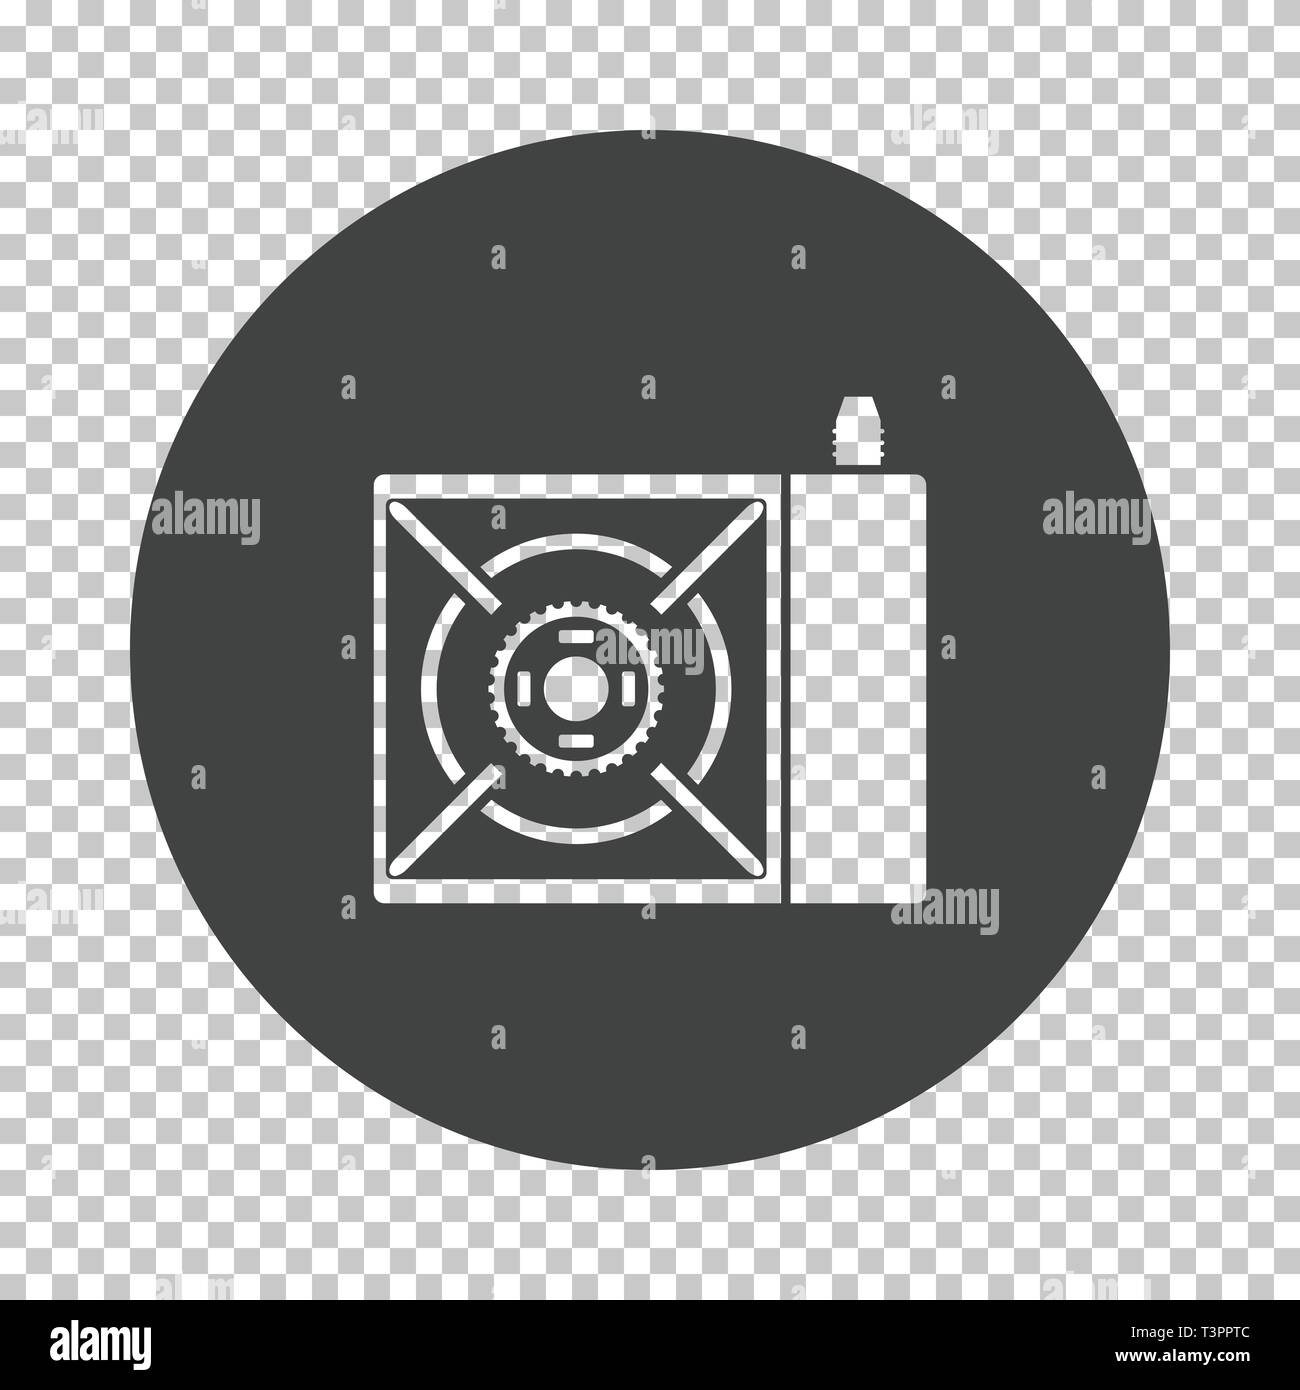 Camping gas burner stove icon. Subtract stencil design on tranparency grid. Vector illustration. Stock Vector